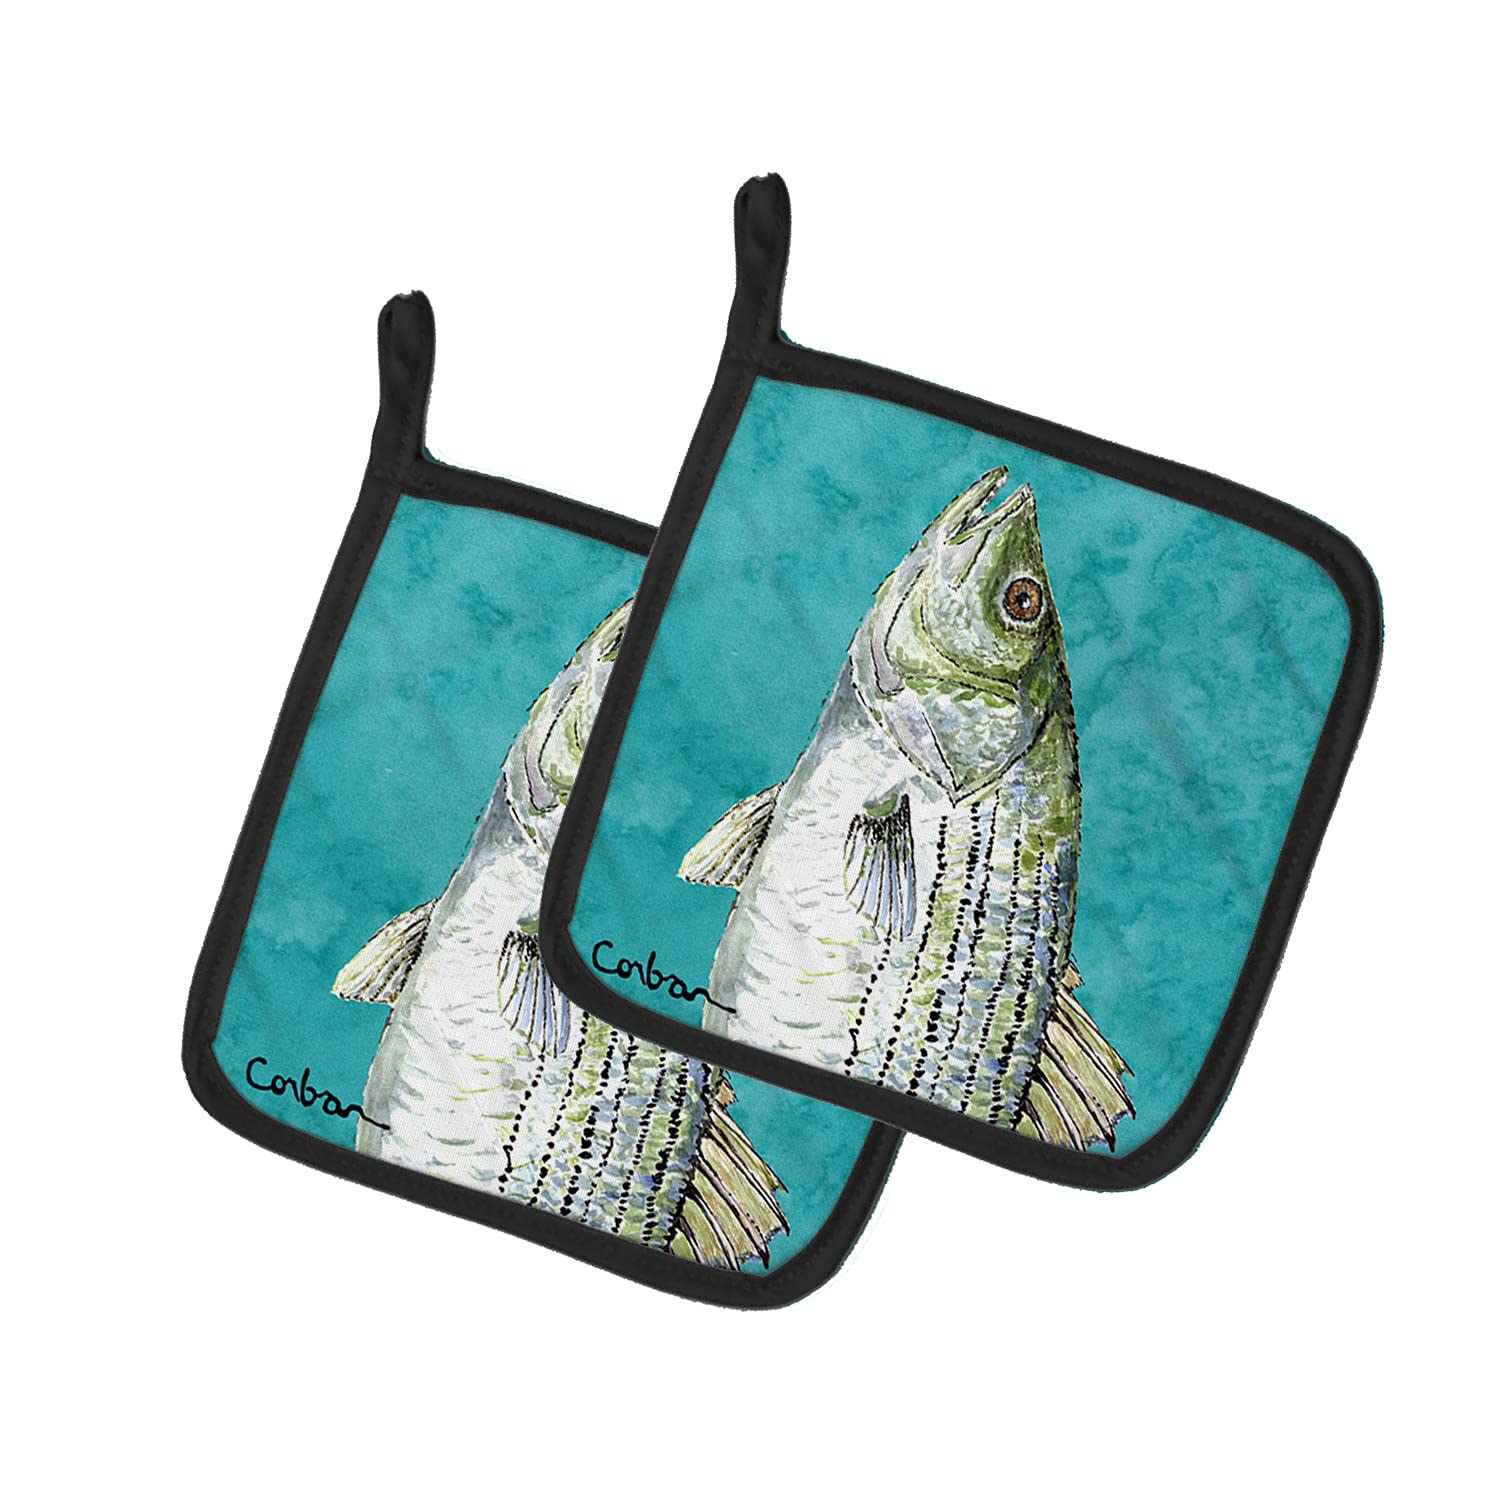 Caroline's Treasures 8720PTHD Striped Bass Fish Pair of Pot Holders Kitchen Heat Resistant Pot Holders Sets Oven Hot Pads for Cooking Baking BBQ, 7 1/2 x 7 1/2